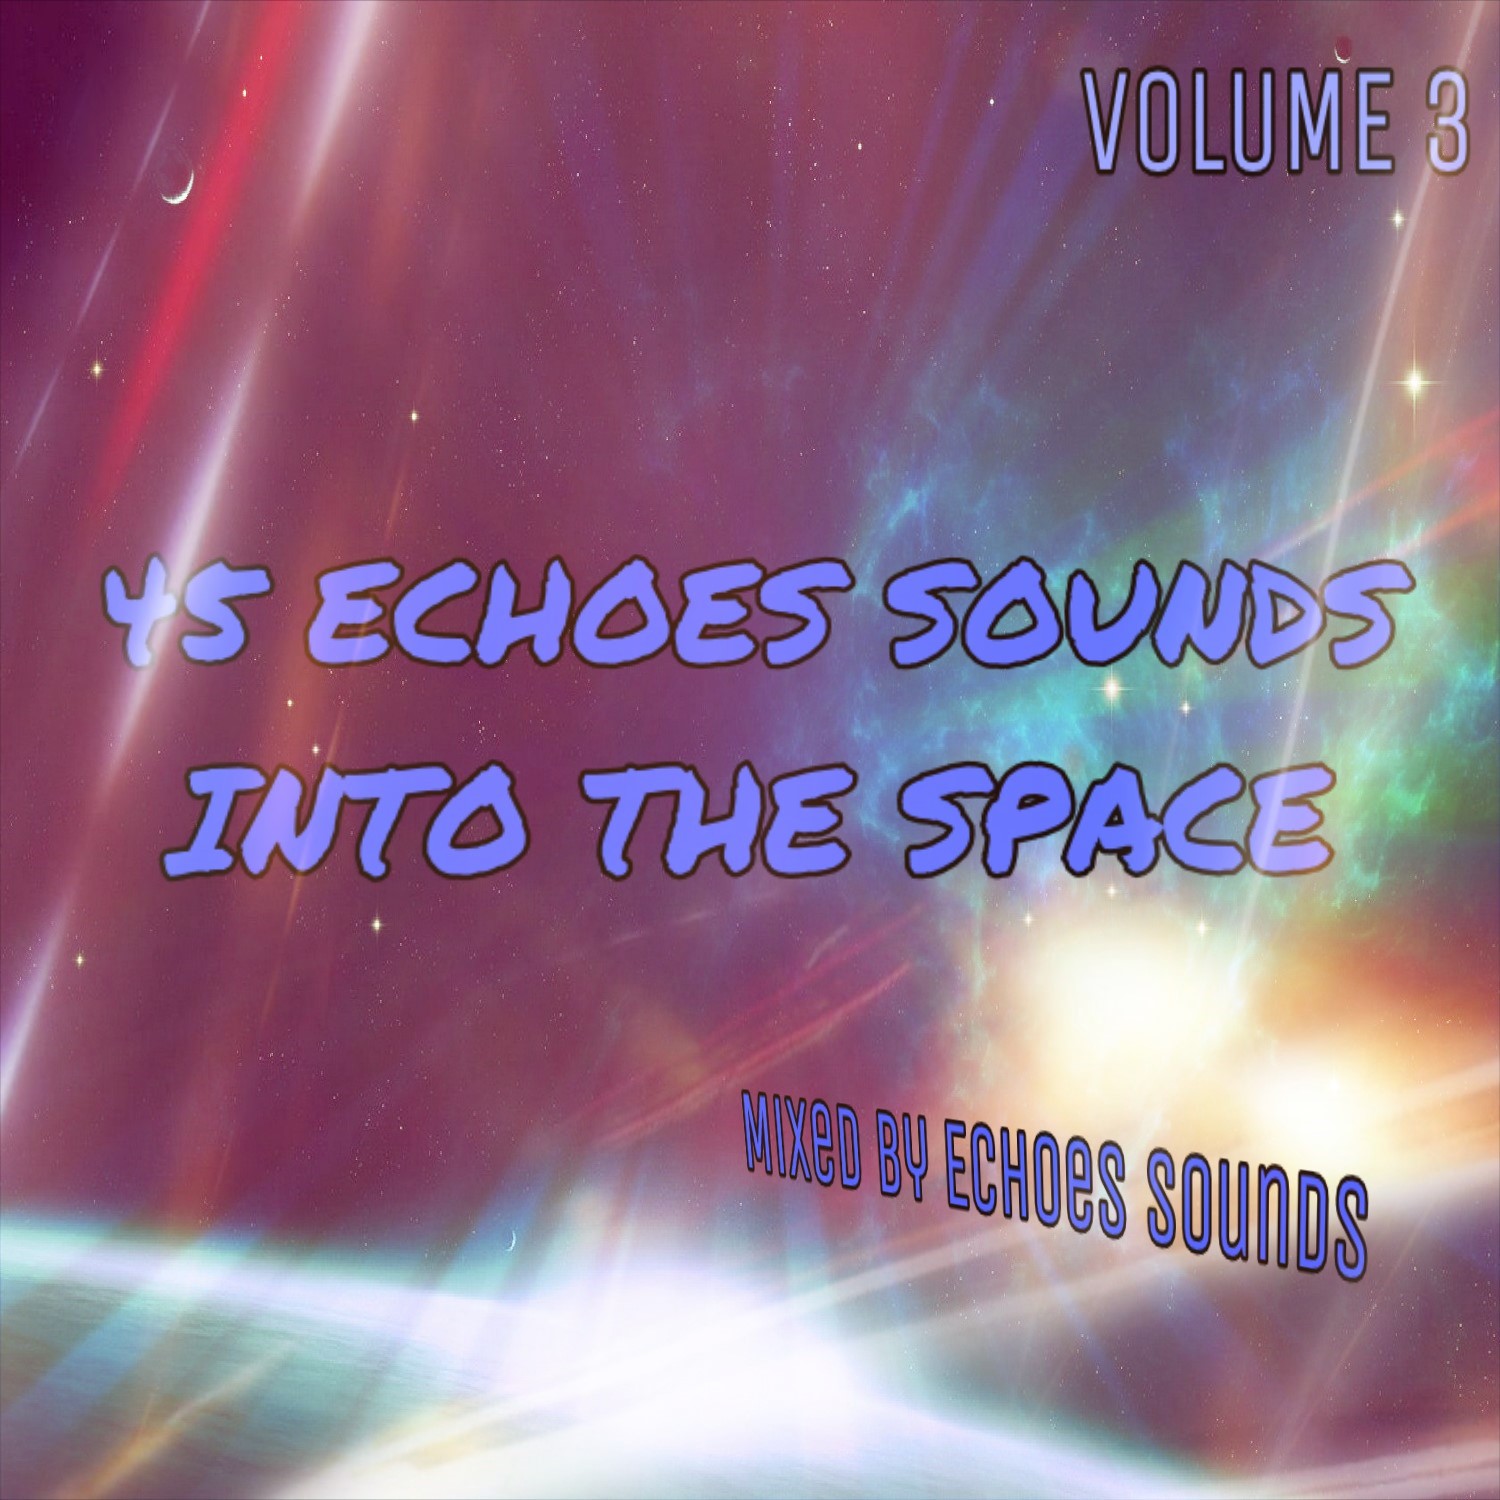 45E069mix-2017 Echoes Sounds - 45 Echoes Sounds Into The Space (Volume 3) .